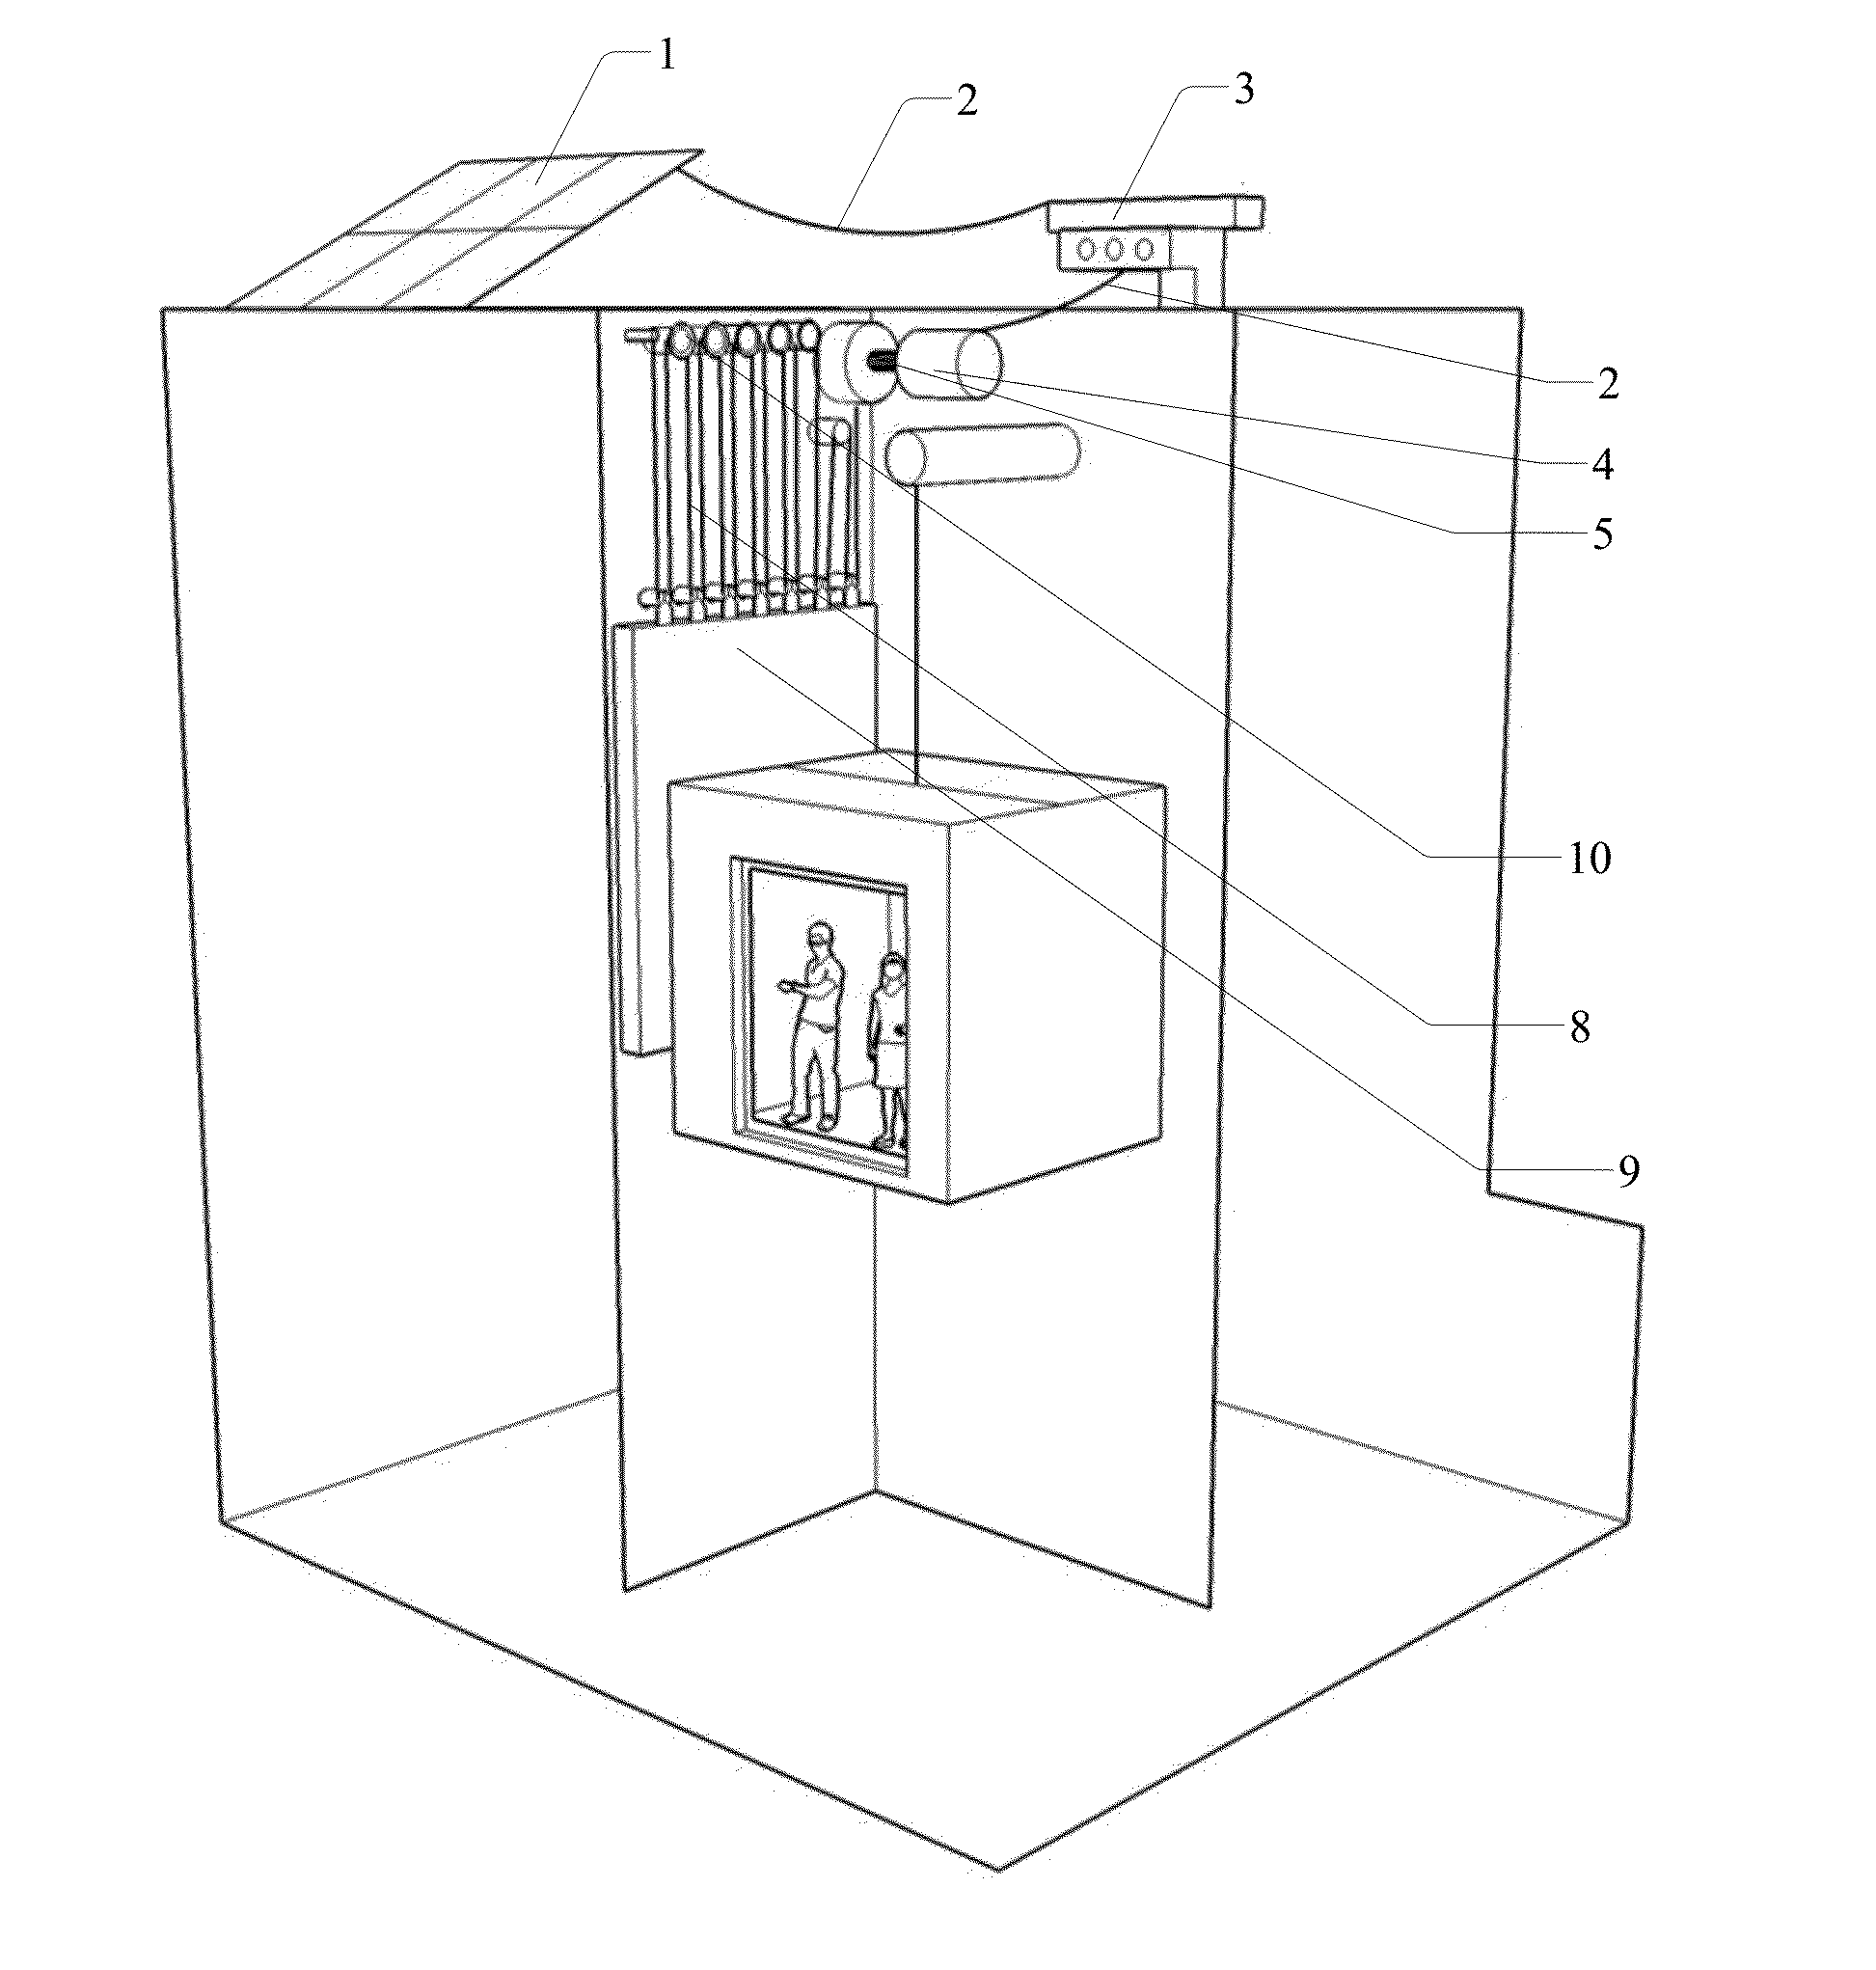 Gravity Field Energy Storage and Recovery System